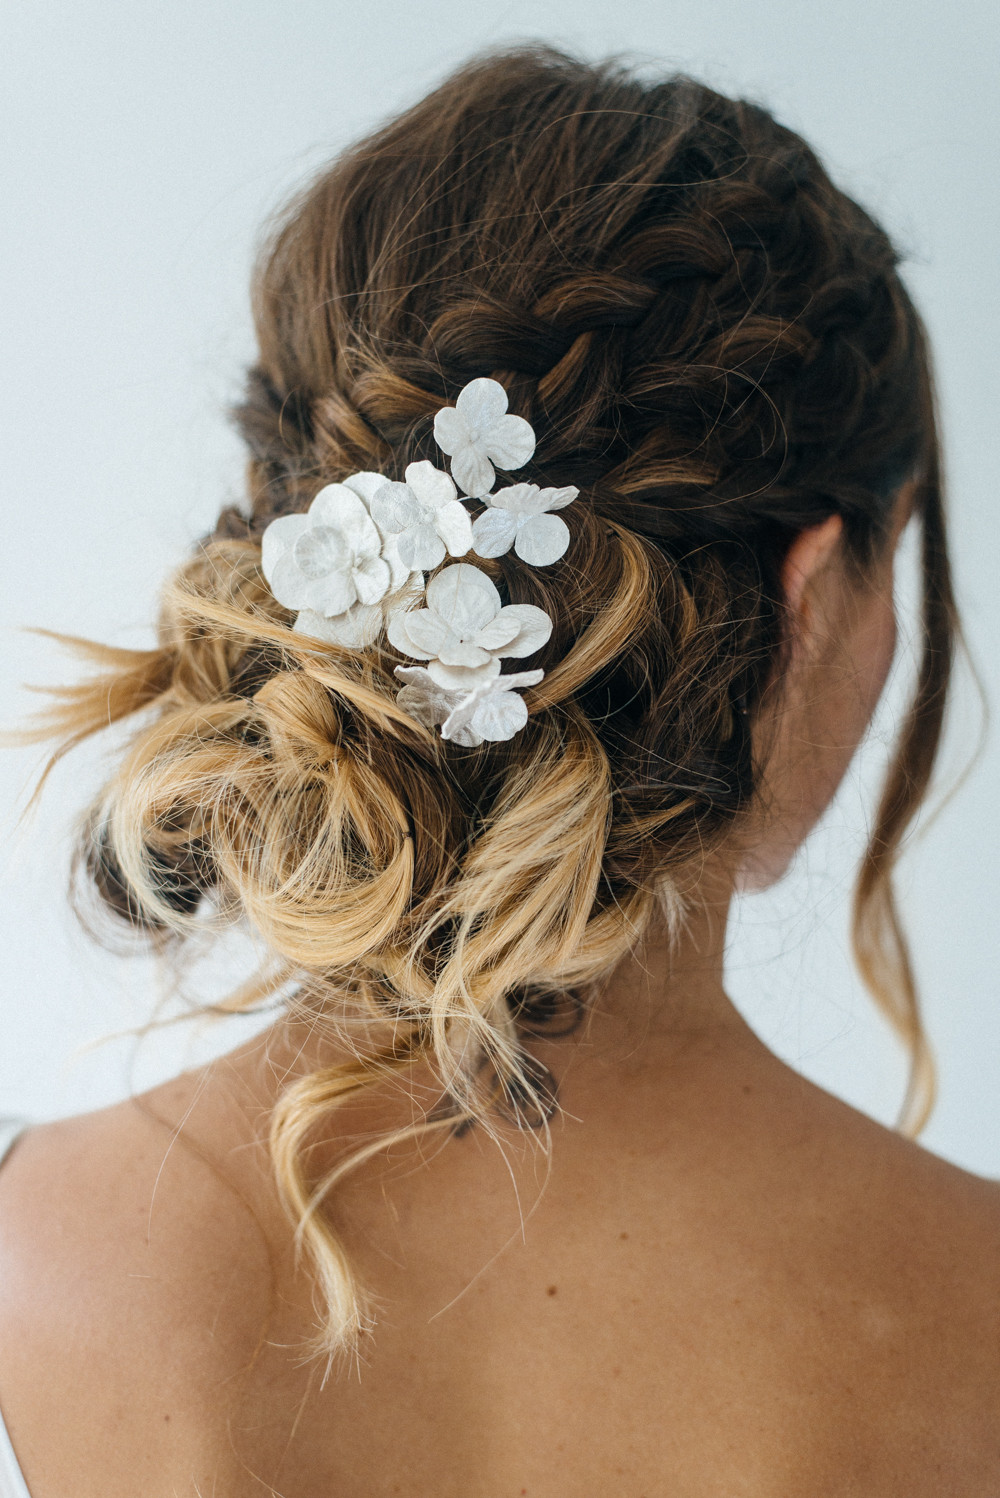 Hairstyles For Your Wedding Day
 Inspiration For Half Up Half Down Wedding Hair With